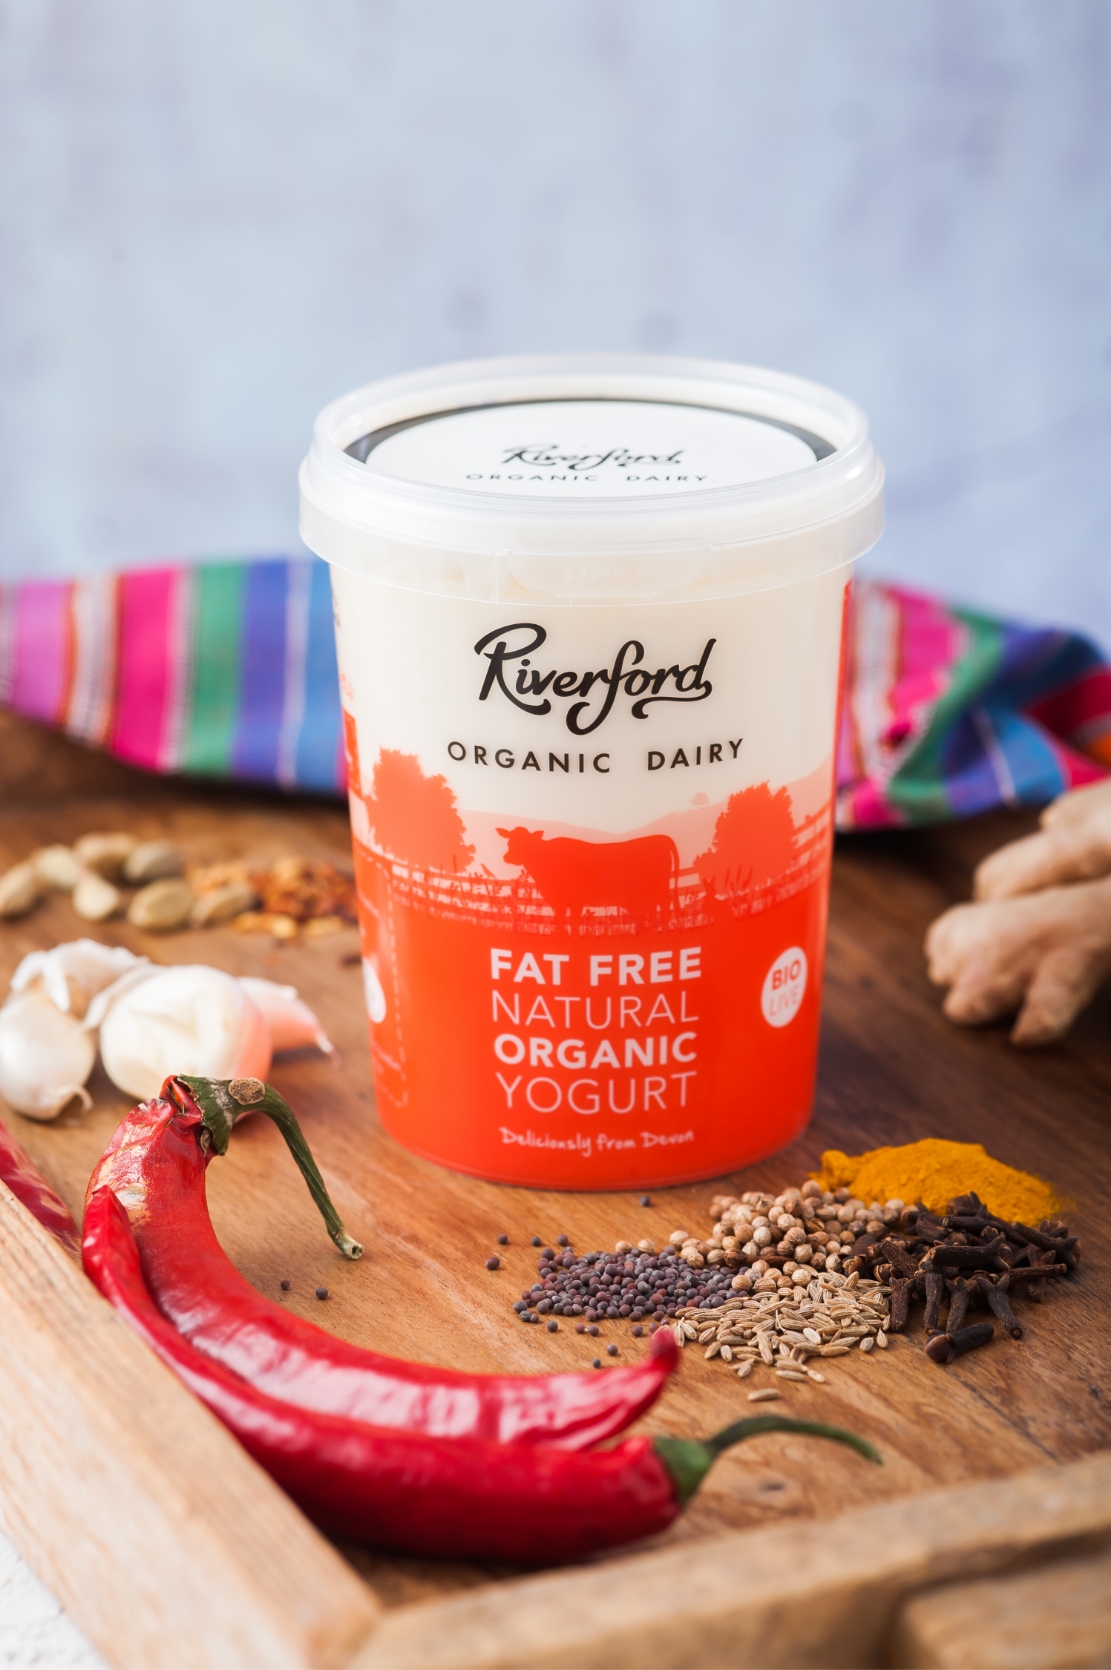 Riverford Dairy new designed Fat Free Natural Yoghurtr packaging